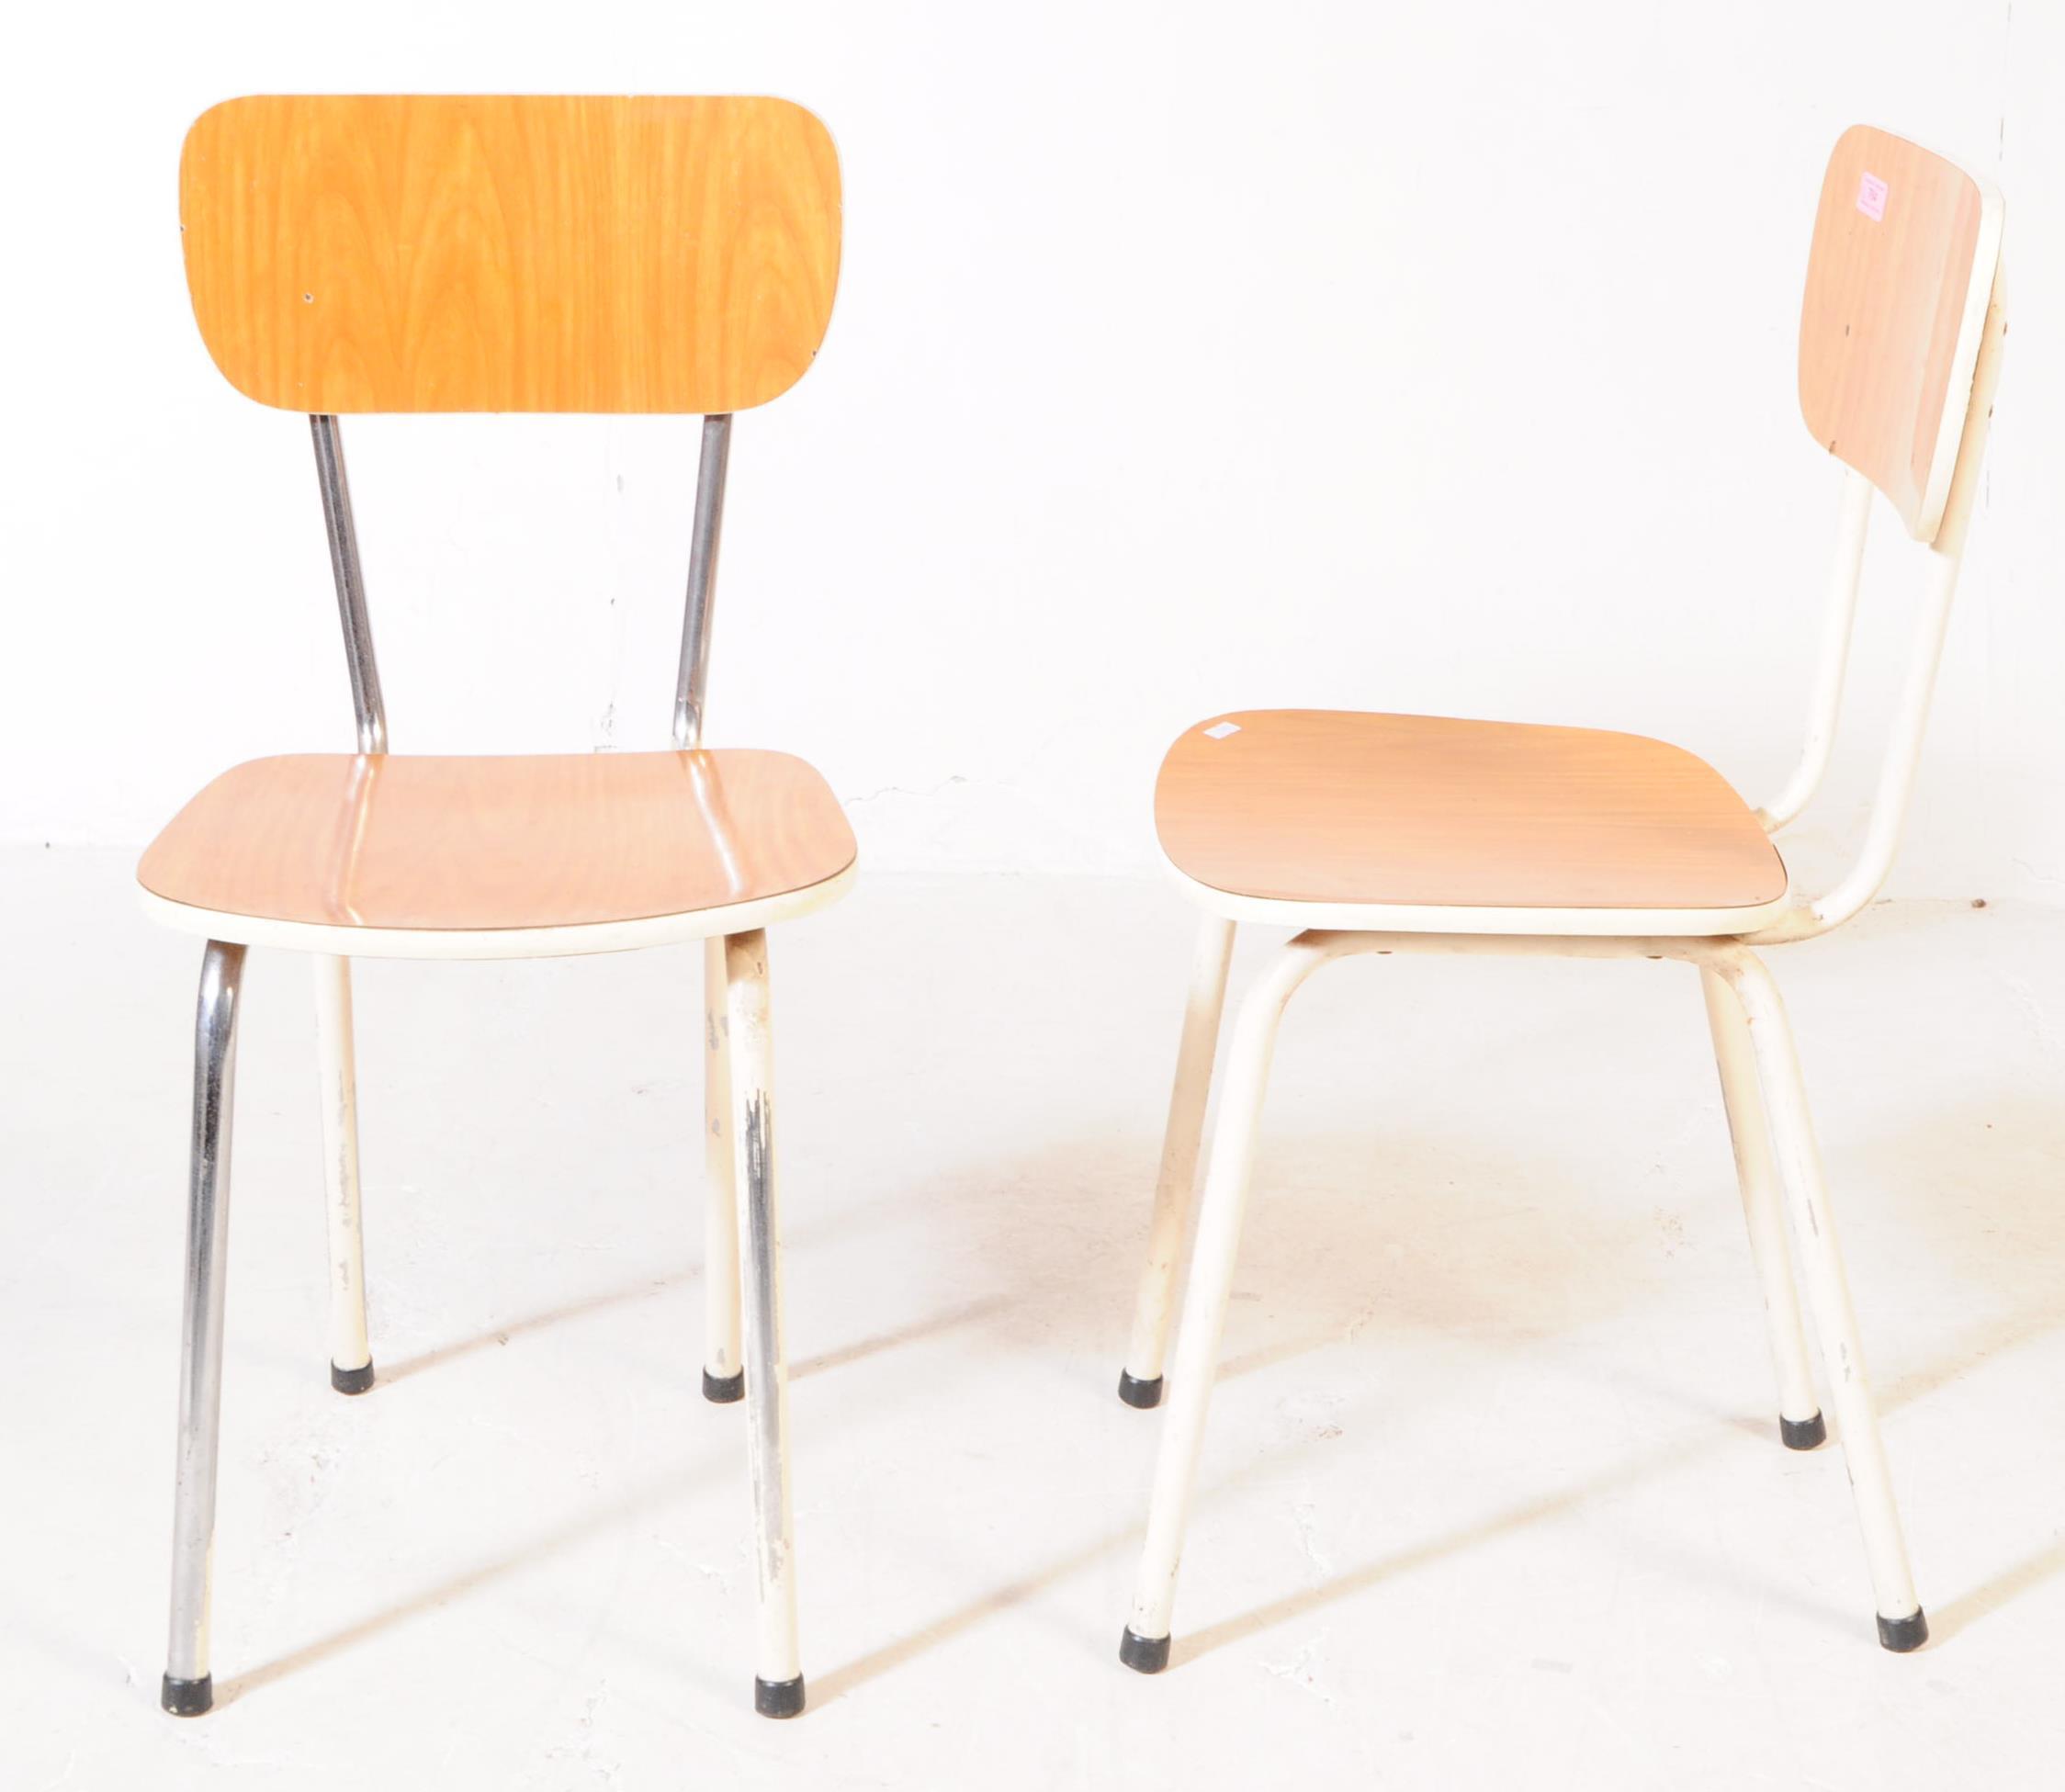 SET OF FOUR RETRO 20TH CENTURY KITCHEN CHAIRS - Image 2 of 3